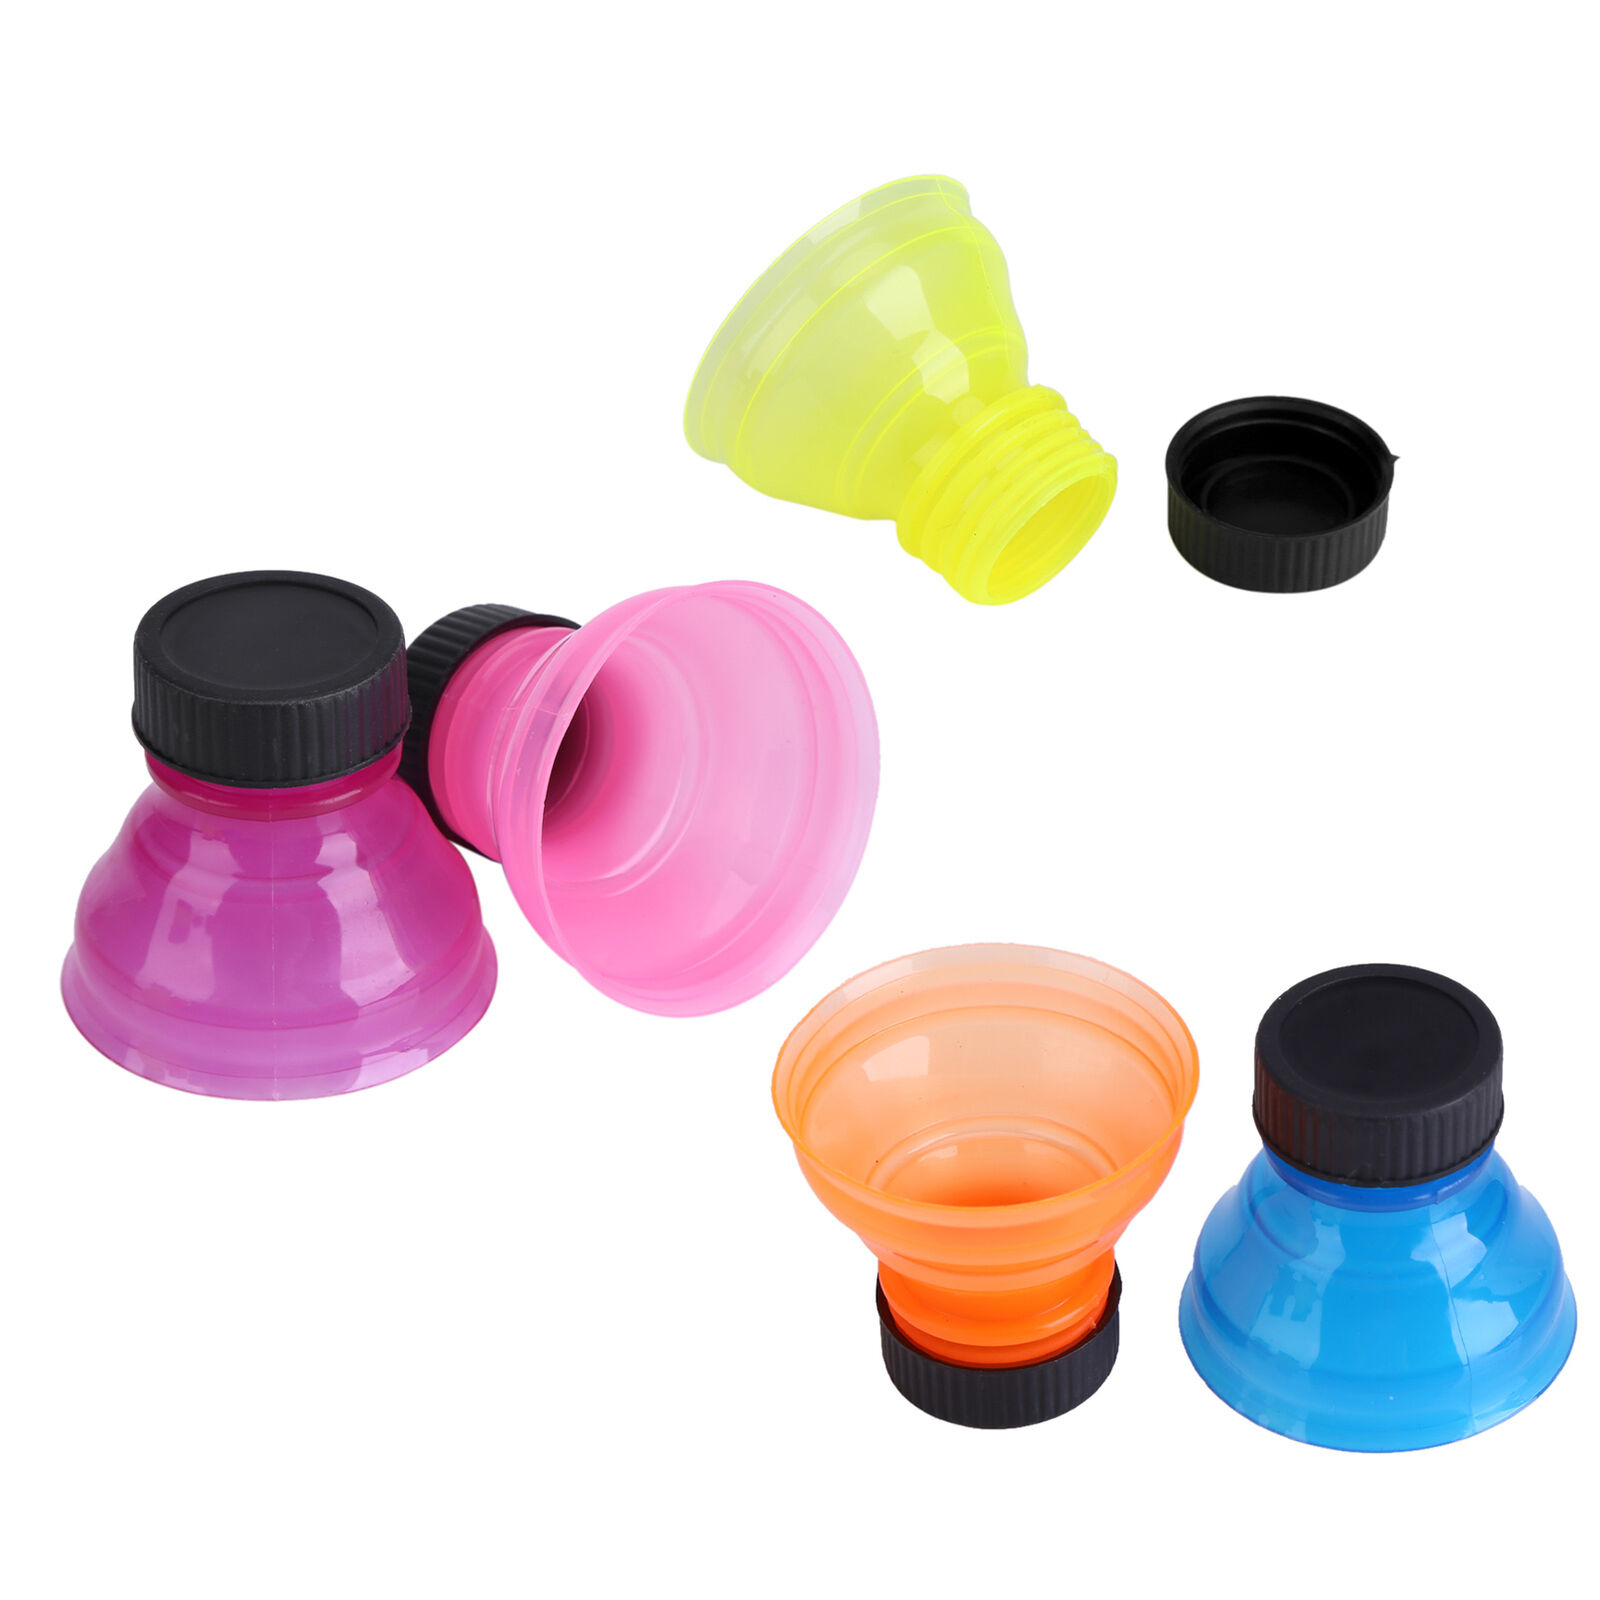 6Pcs Bottle Caps Reusable Bottle Caps For Cool Soda Drink Drink Unbranded Does not apply - фотография #18